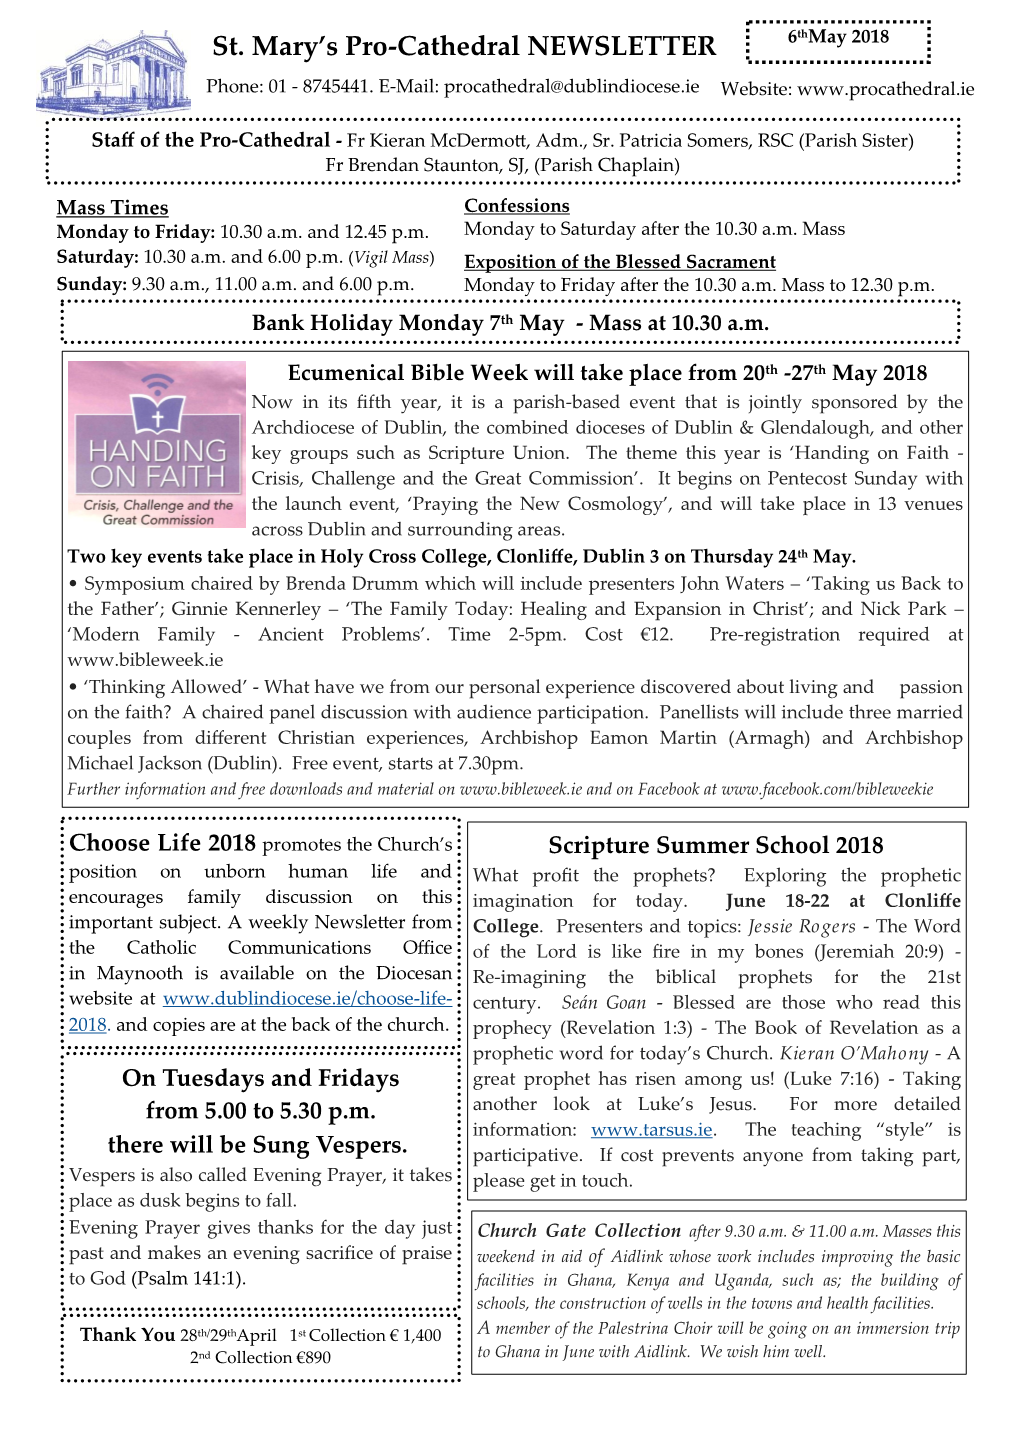 St. Mary's Pro-Cathedral NEWSLETTER